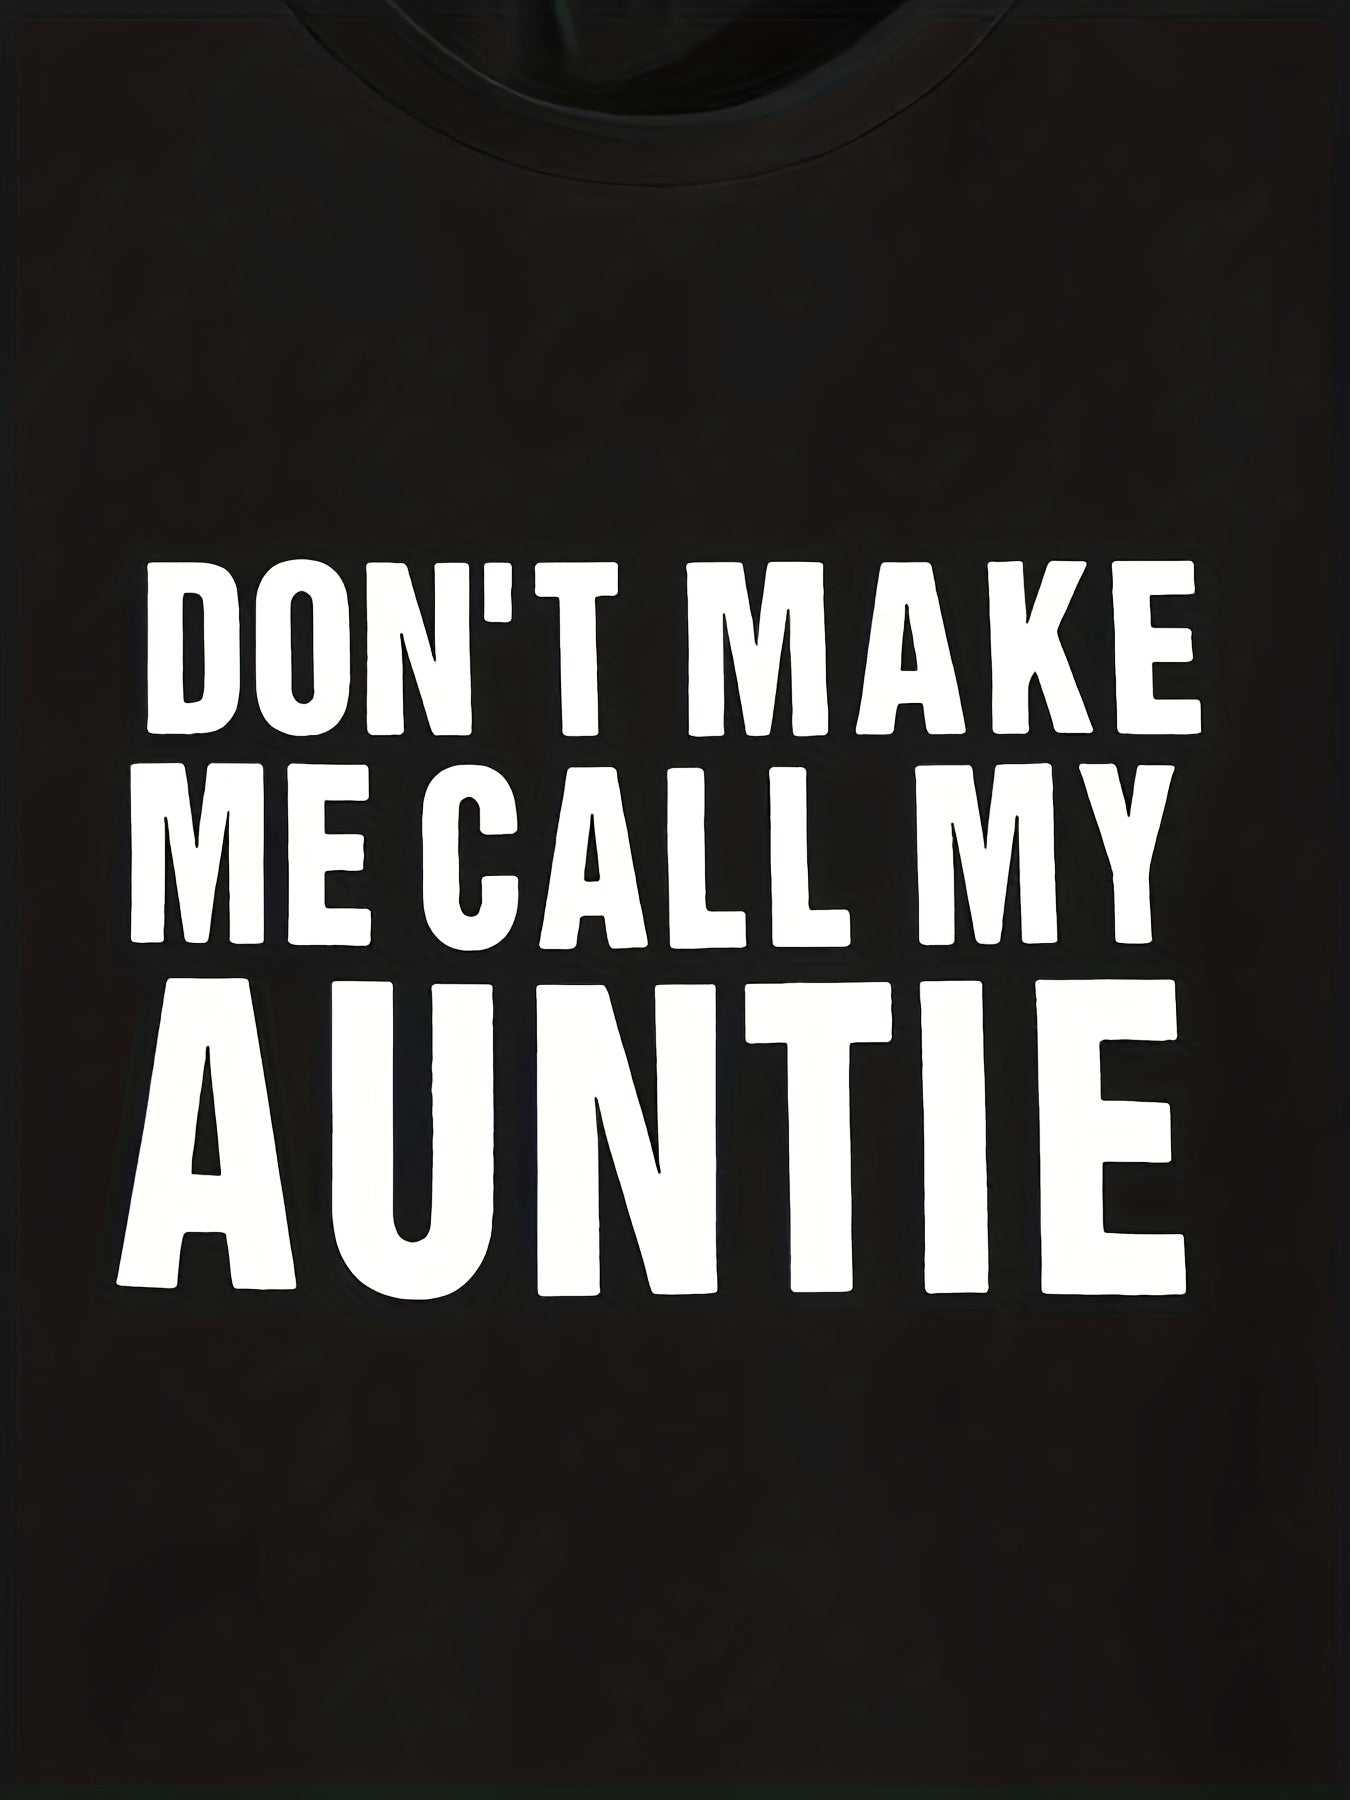 Boys "Don't Make Me Call My Auntie" Round Neck T-shirt Tees Tops Casual Soft Comfortable Summer Clothes